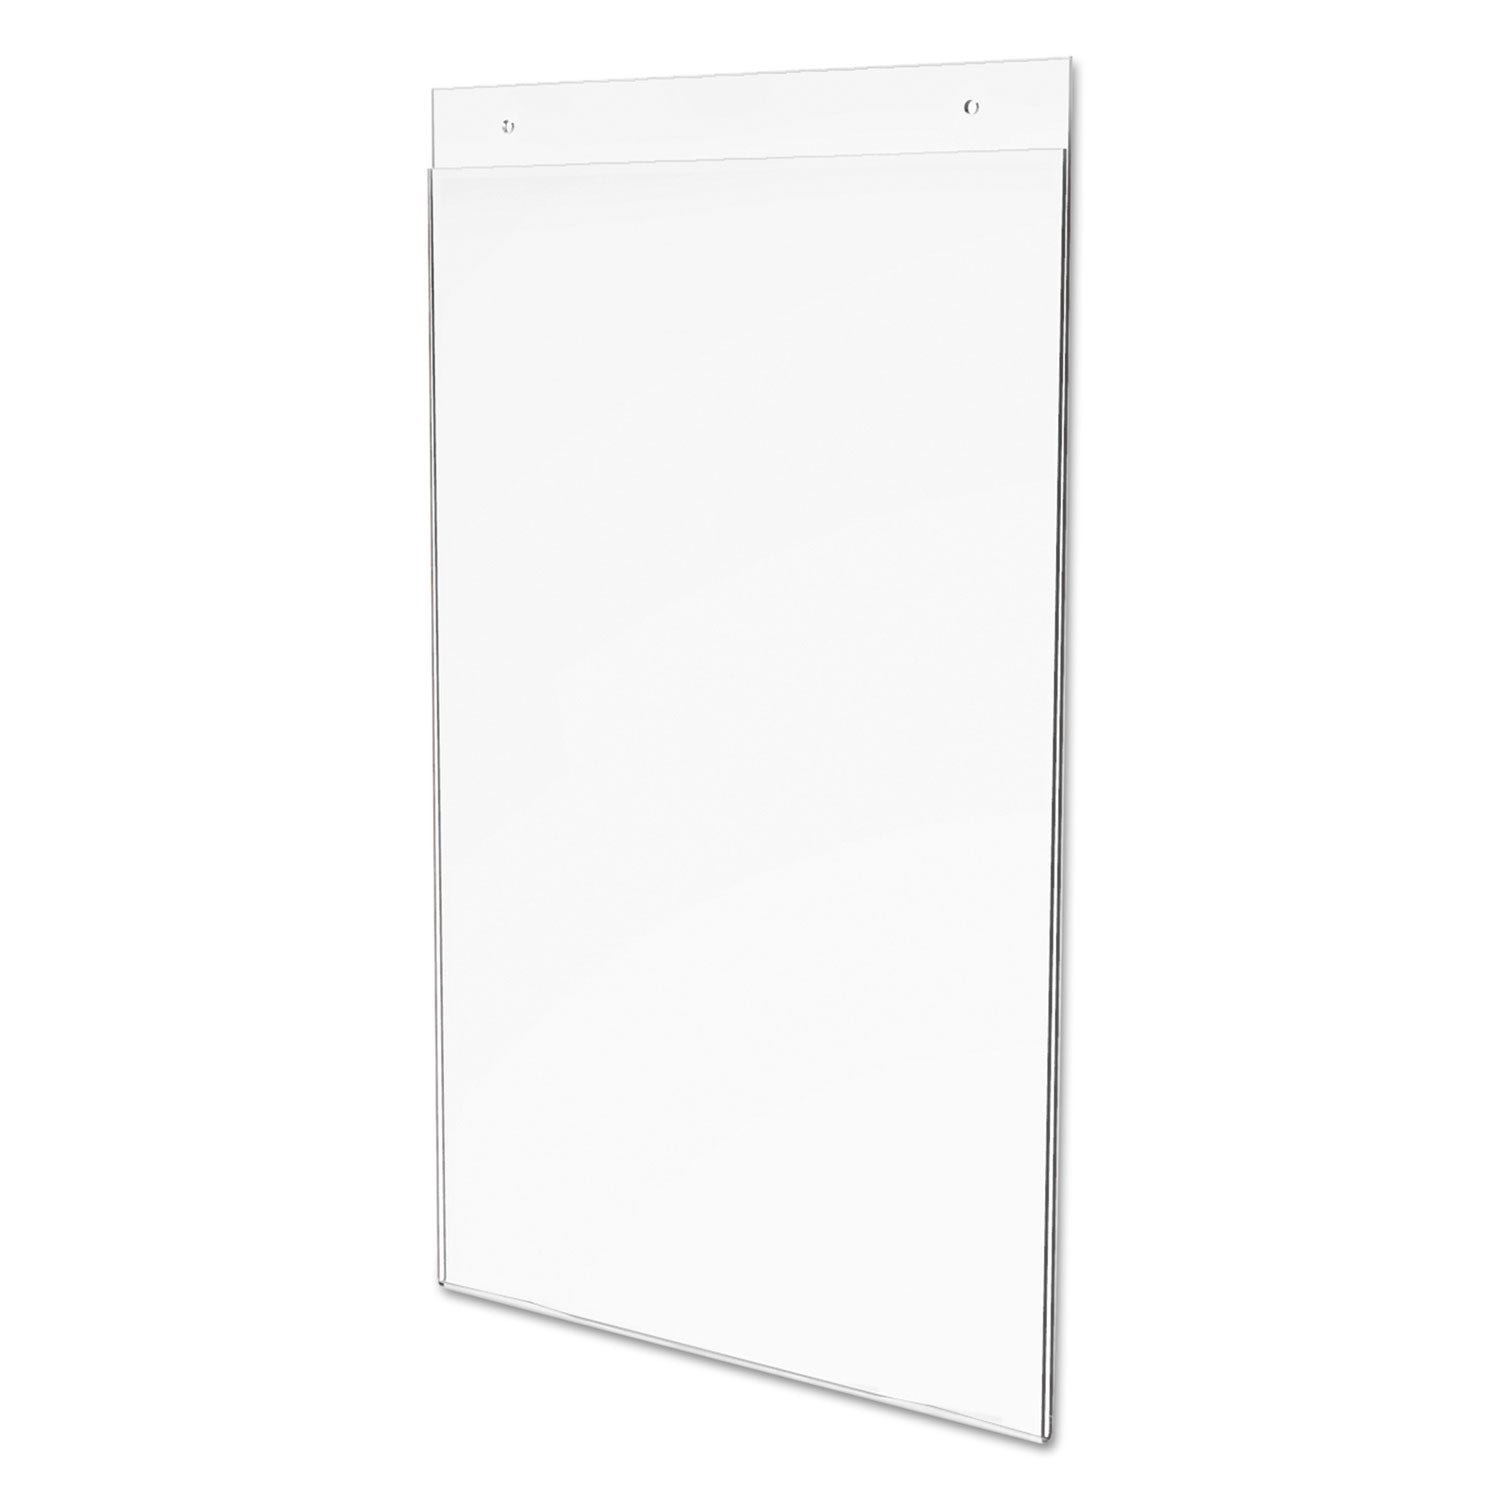 classic-image-single-sided-wall-sign-holder-plastic-11-x-17-insert-clear_def68001 - 6